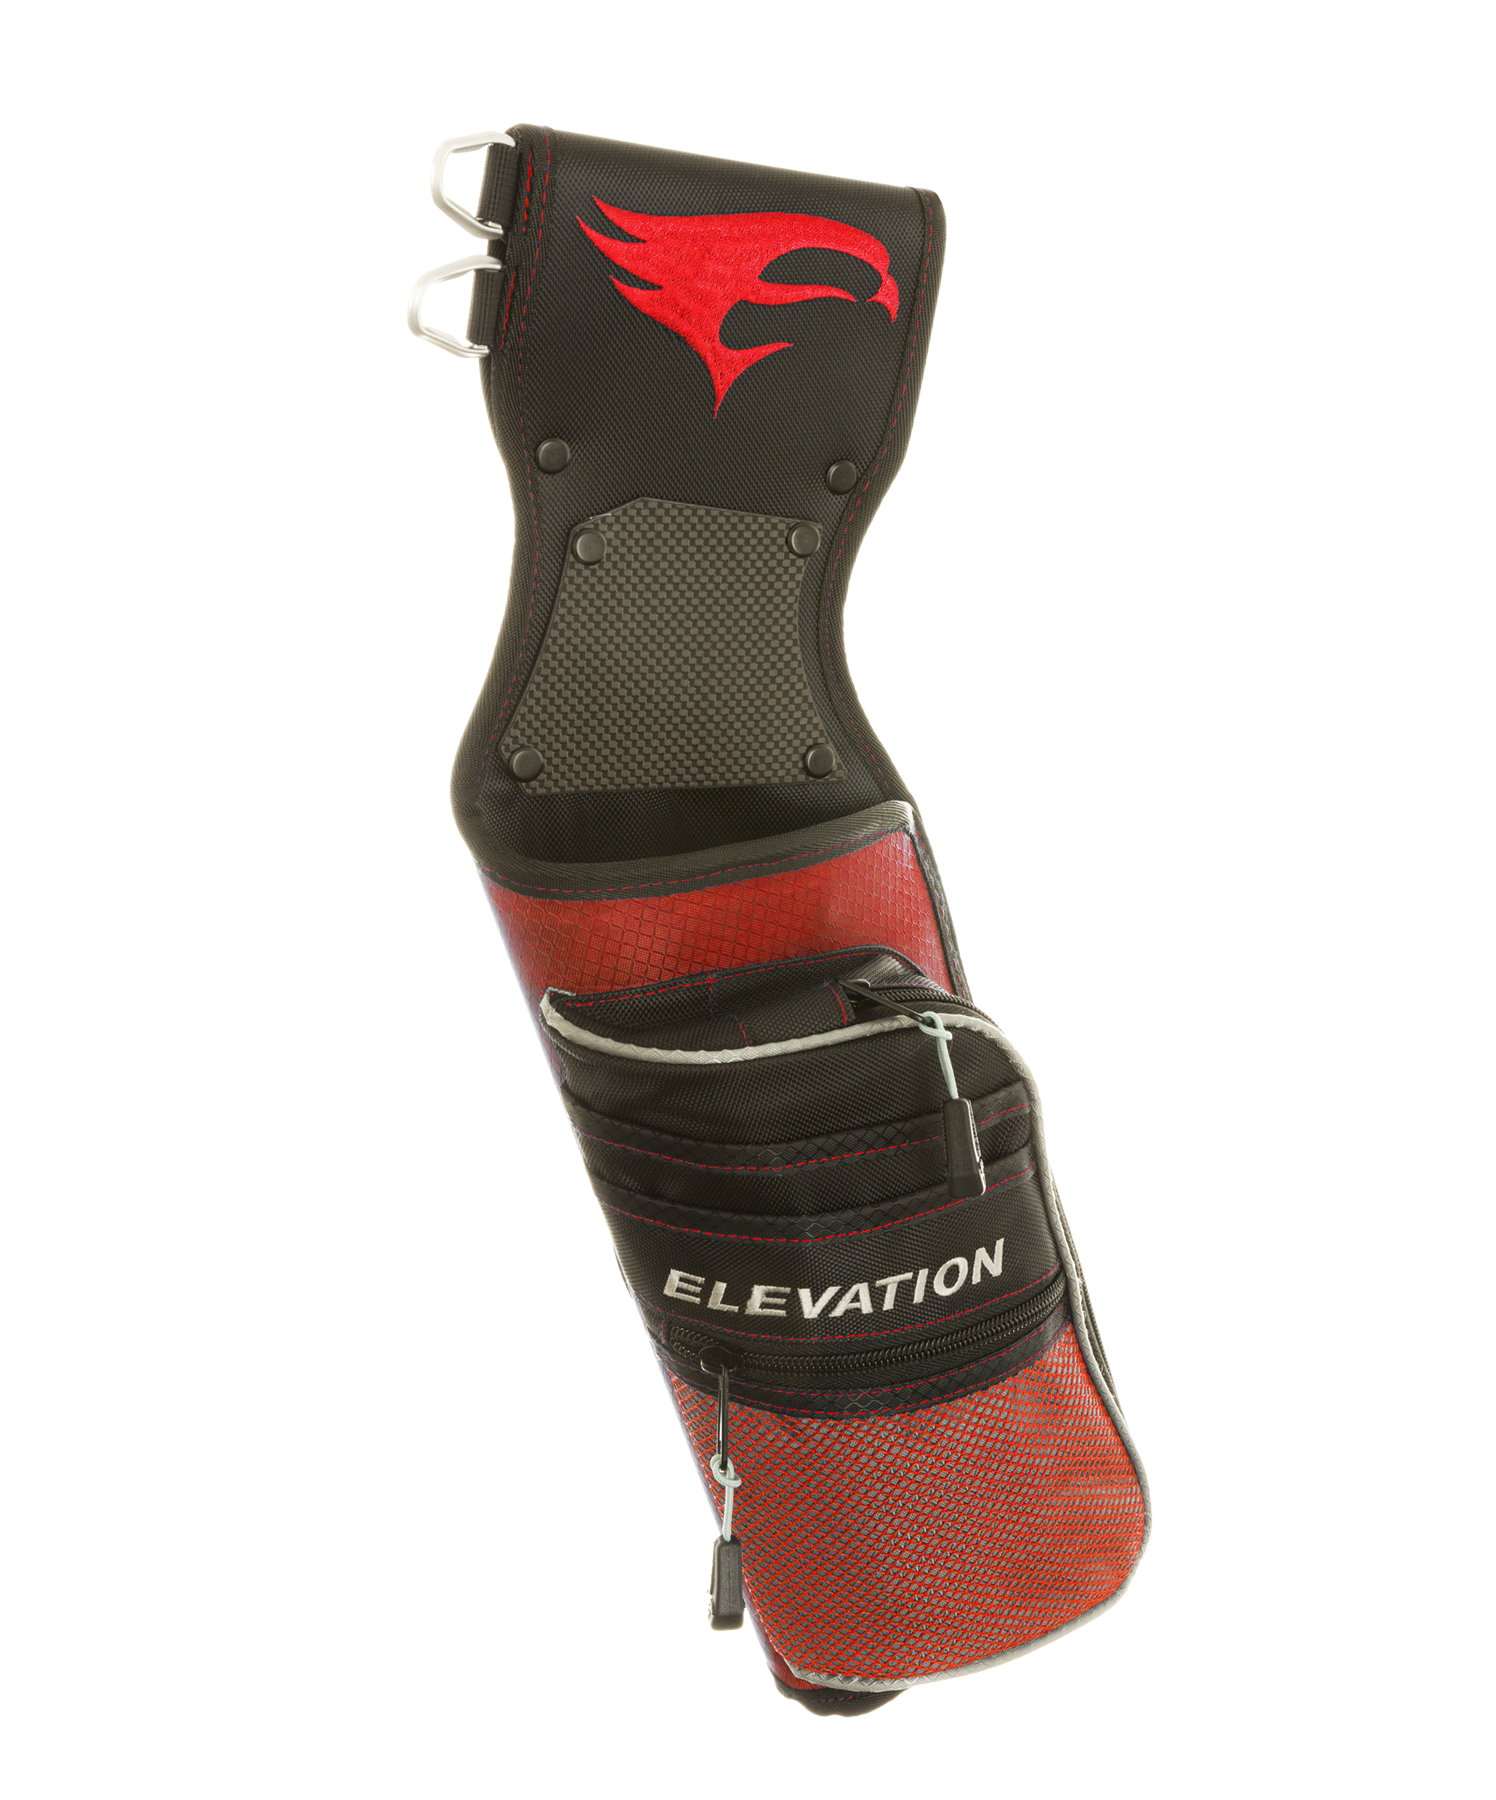 <a href="https://bit.ly/38U2t9n" style="color:#d71f35;">Nerve Field Quiver</a>